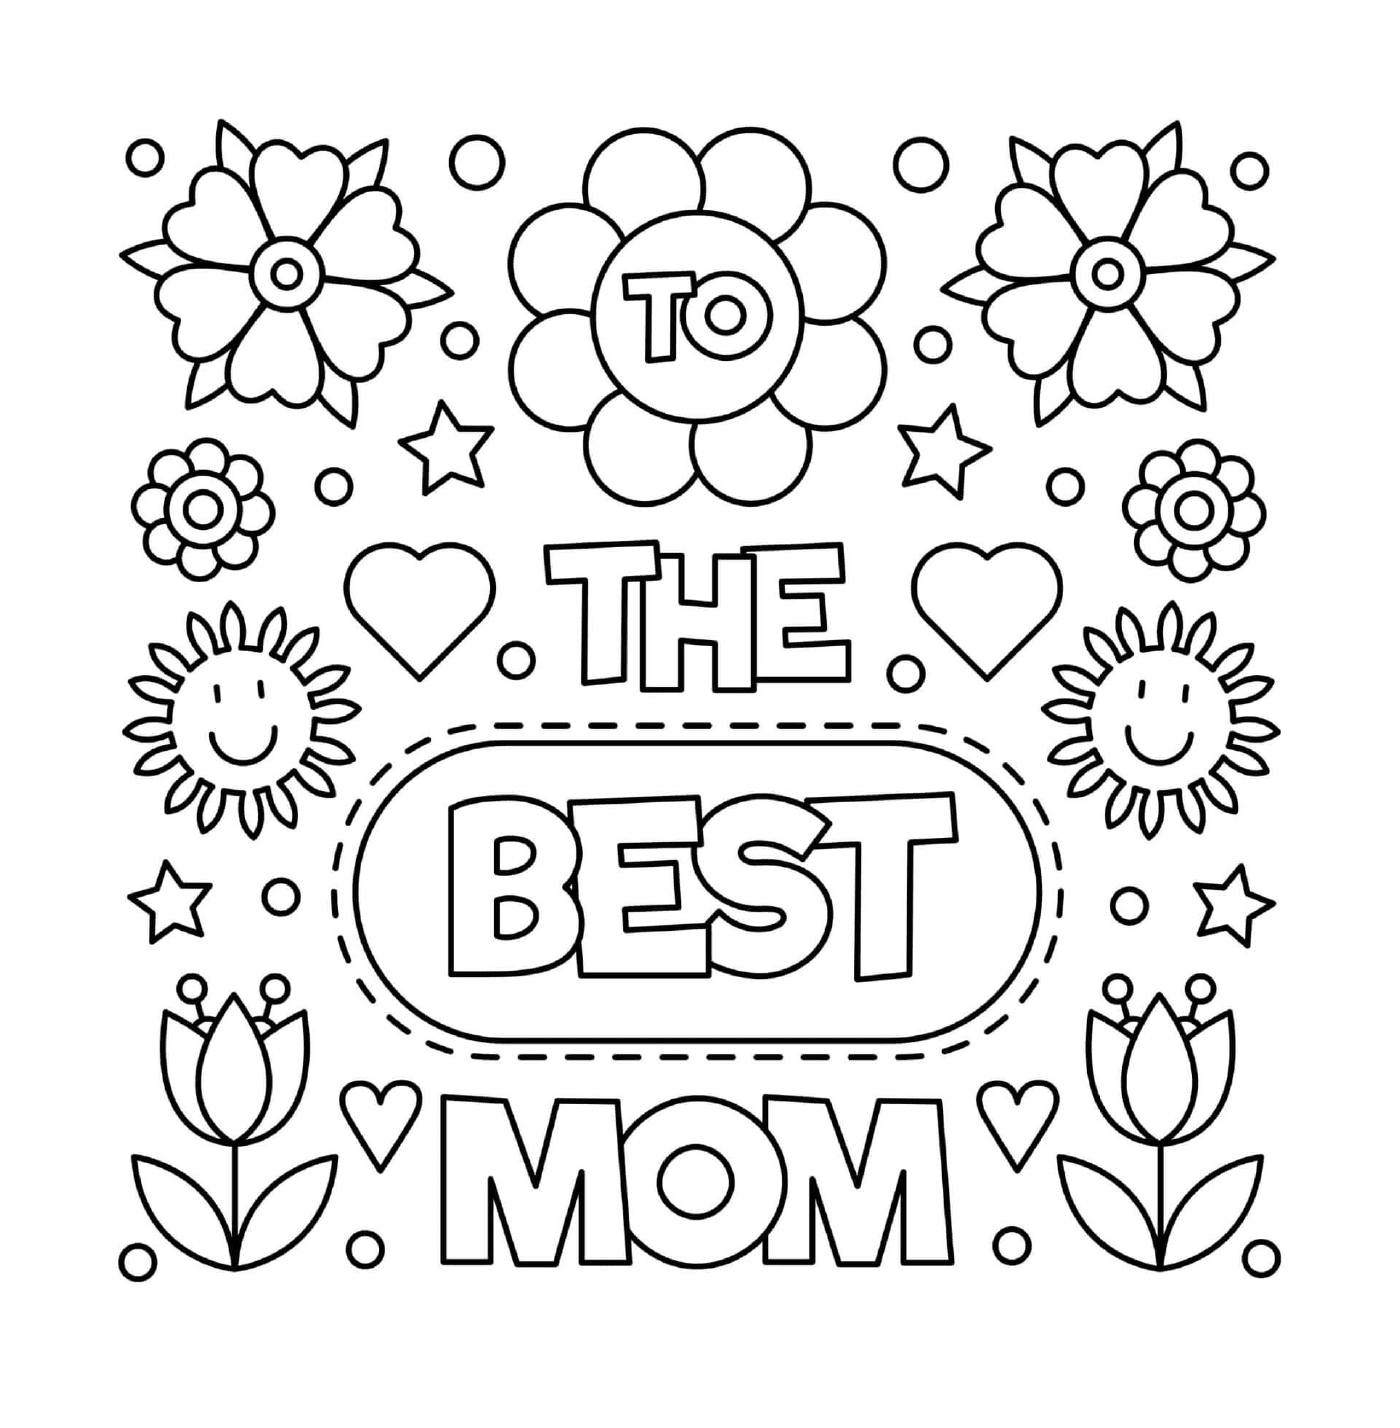  To the best mom, with flowers and hearts 